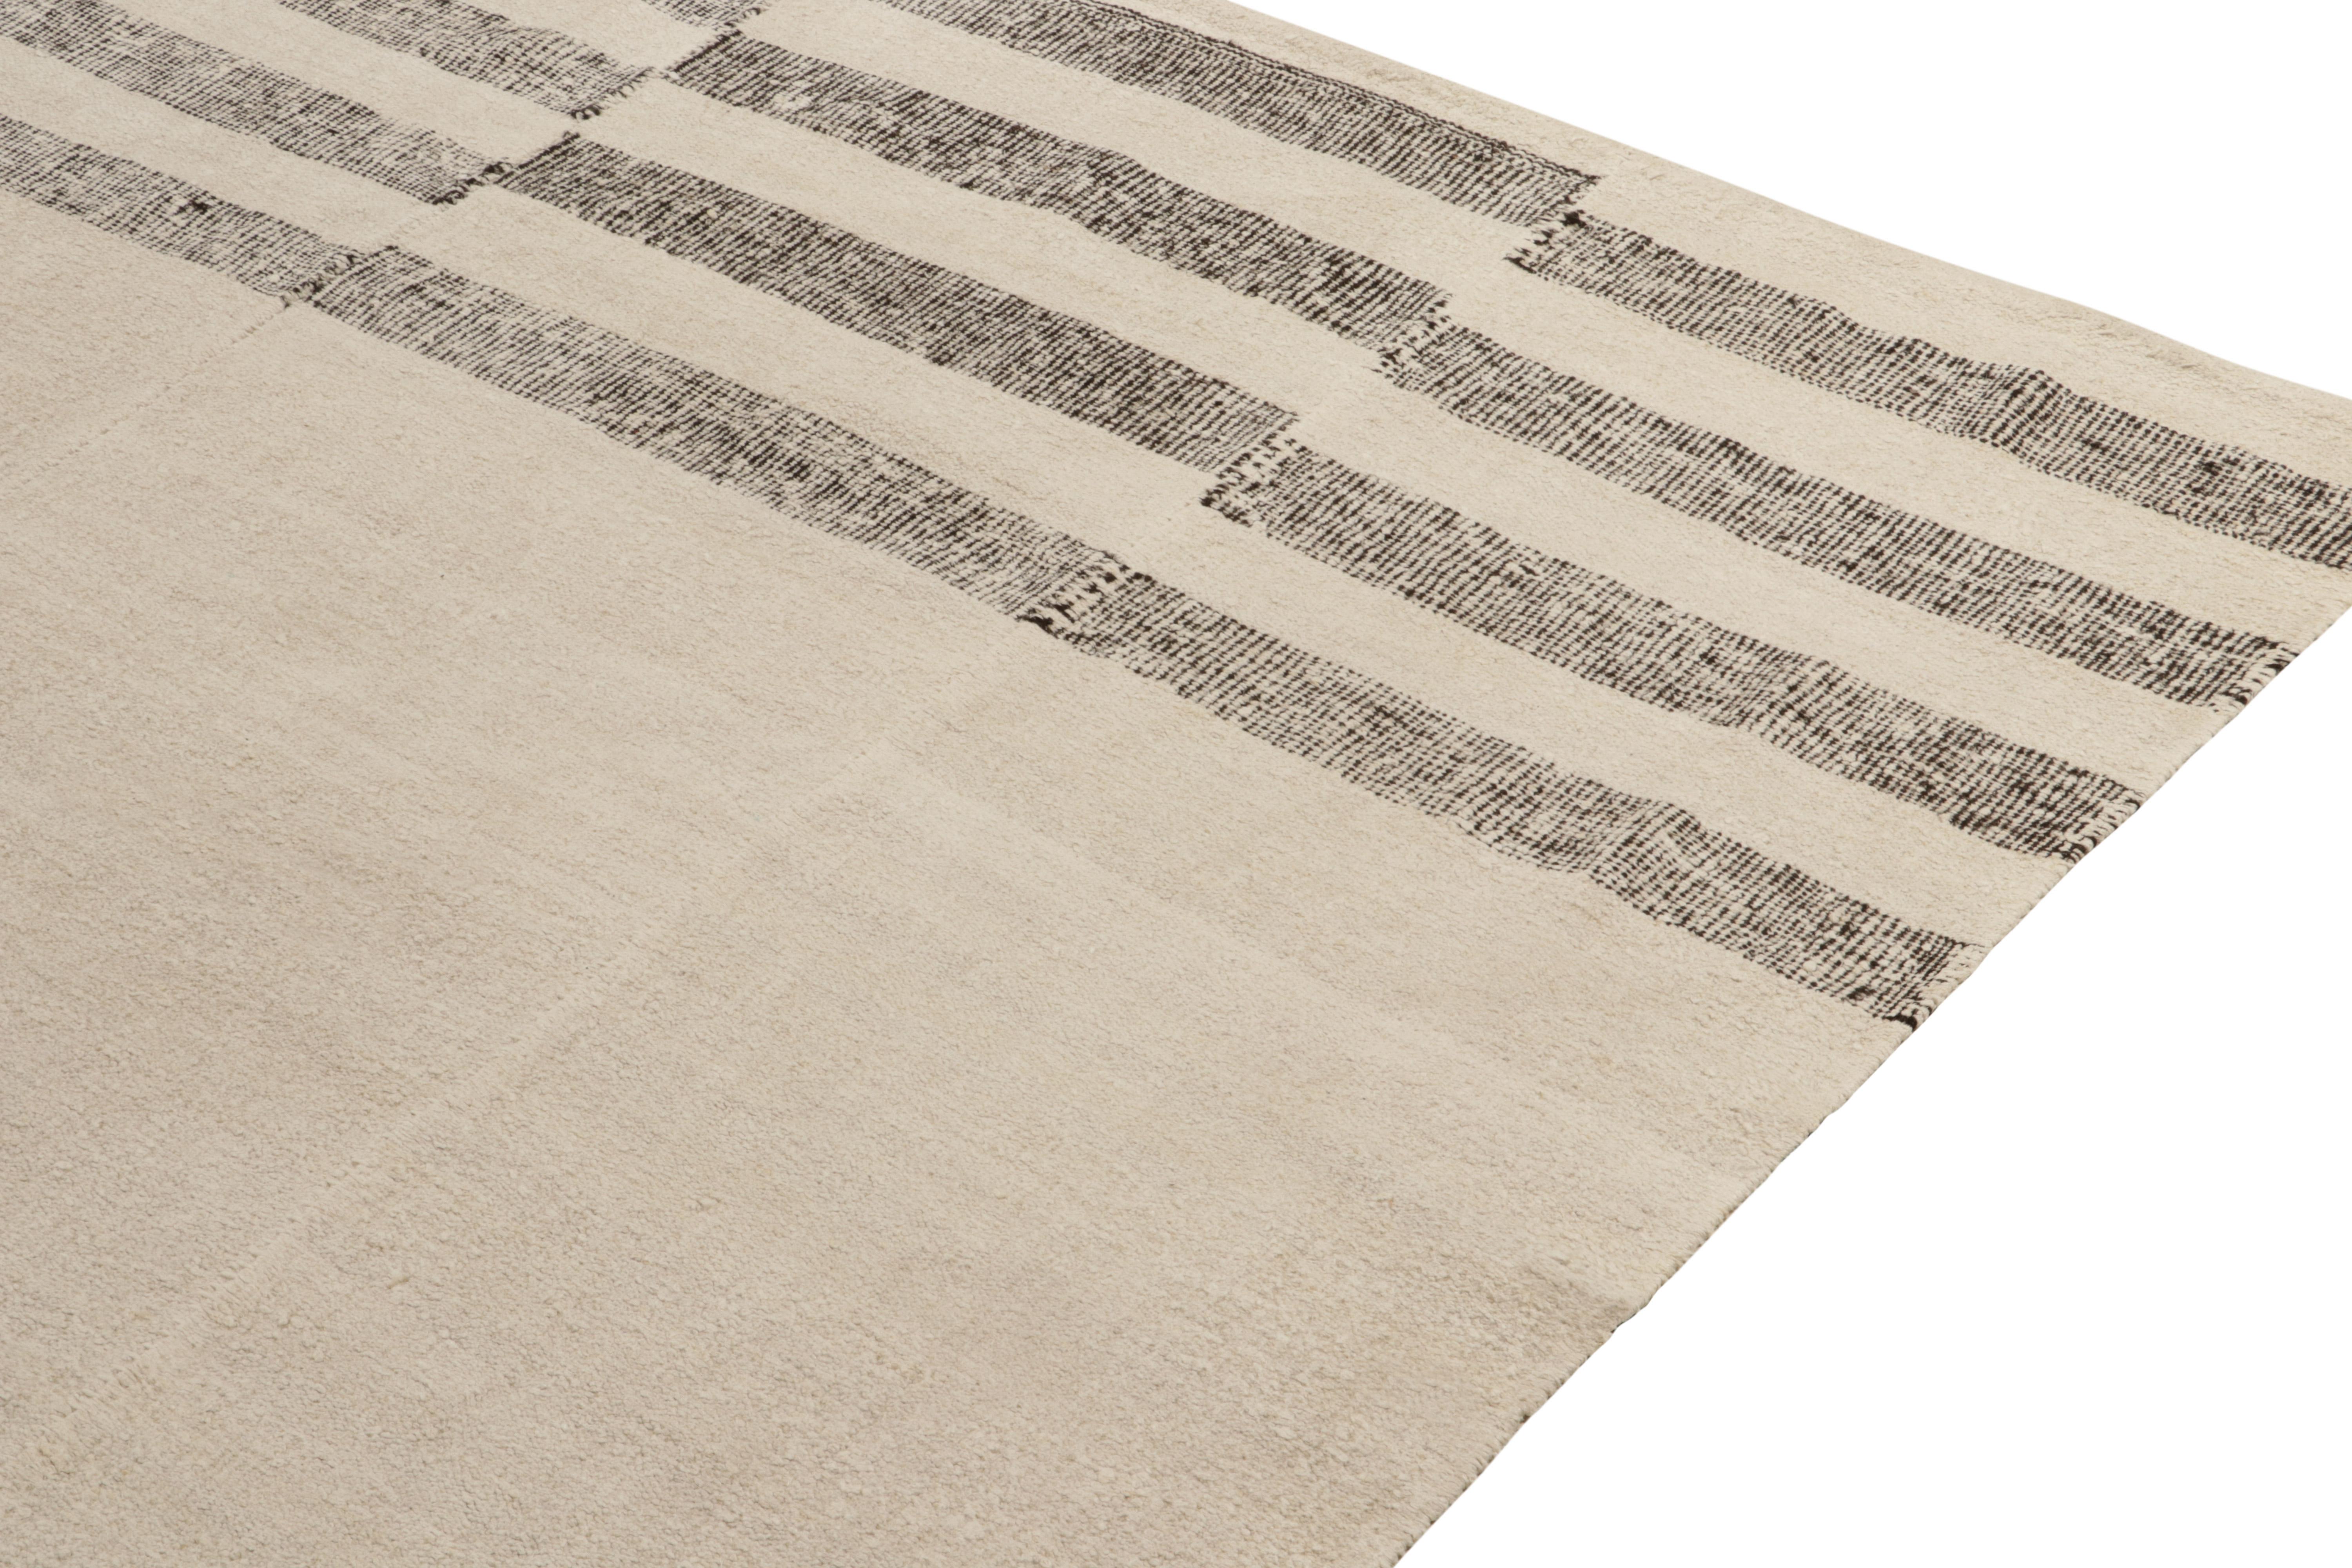 Mid-20th Century Rare Vintage Turkish Kilim in Beige-Black Panel Woven Style by Rug & Kilim For Sale